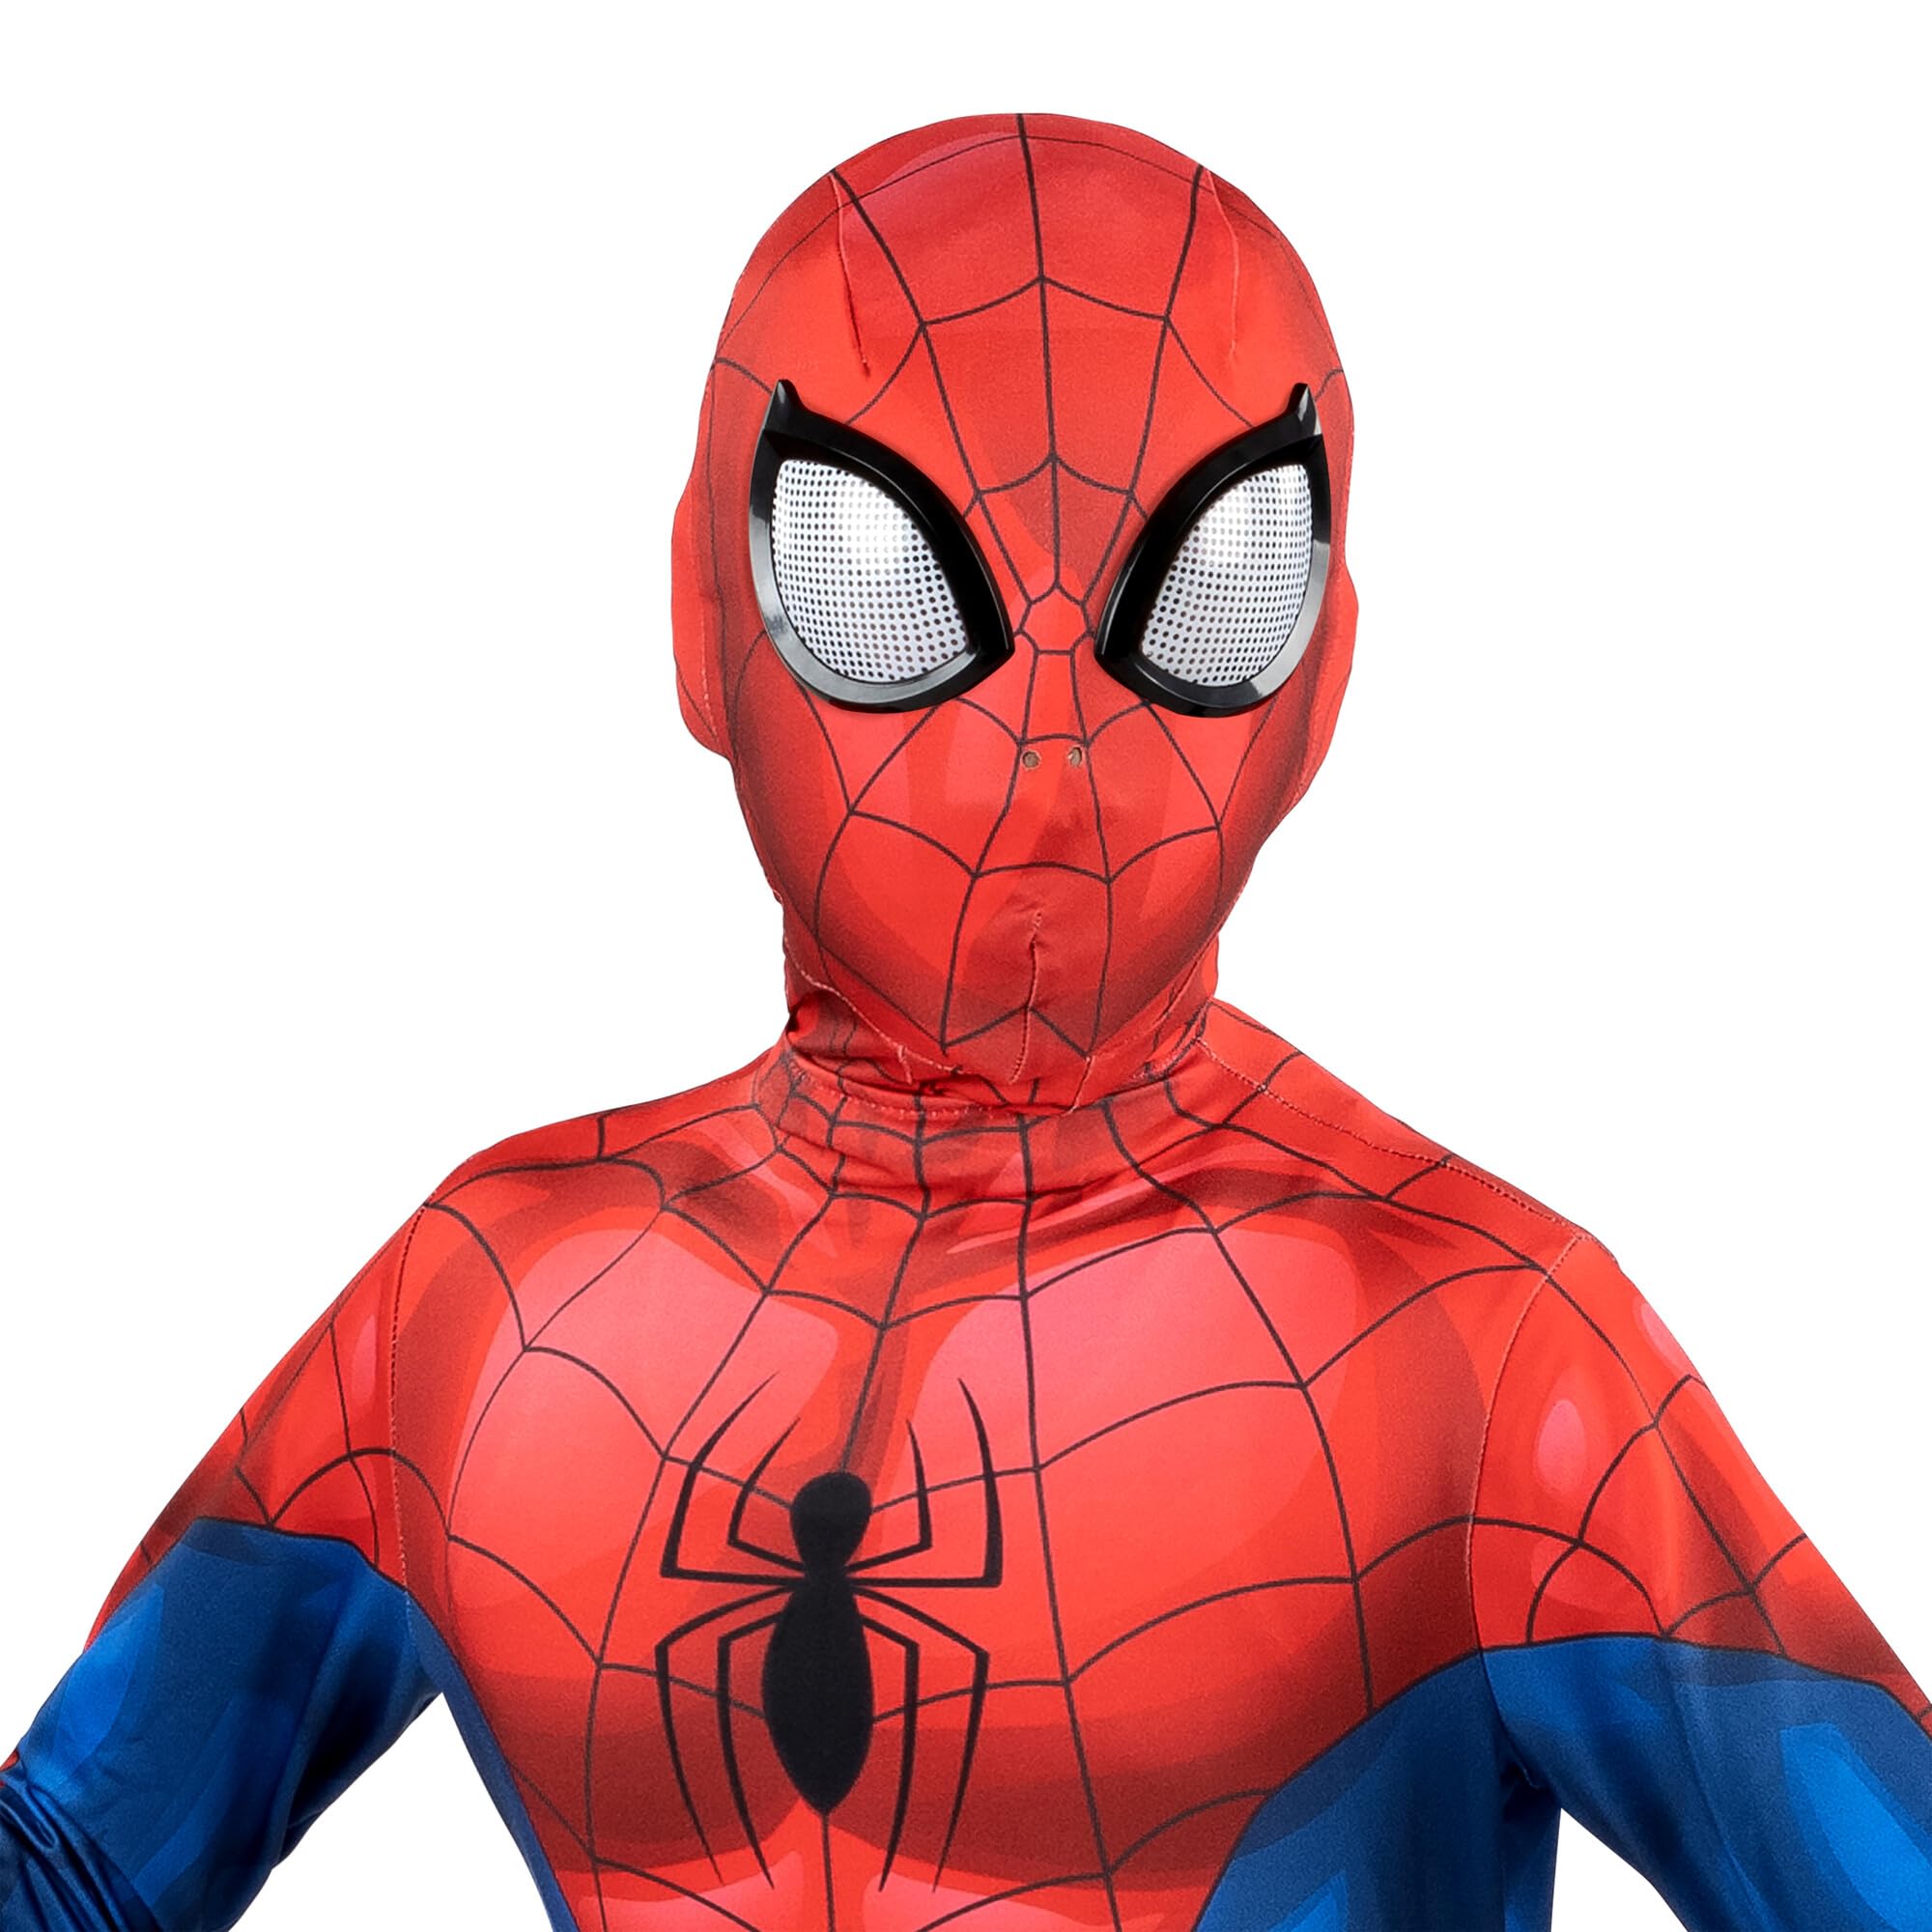 MARVEL Spider-Man Official Youth Deluxe Zentai Suit - Spandex Jumpsuit with Printed Design and Detachable Spandex Mask and Plastic Eyes